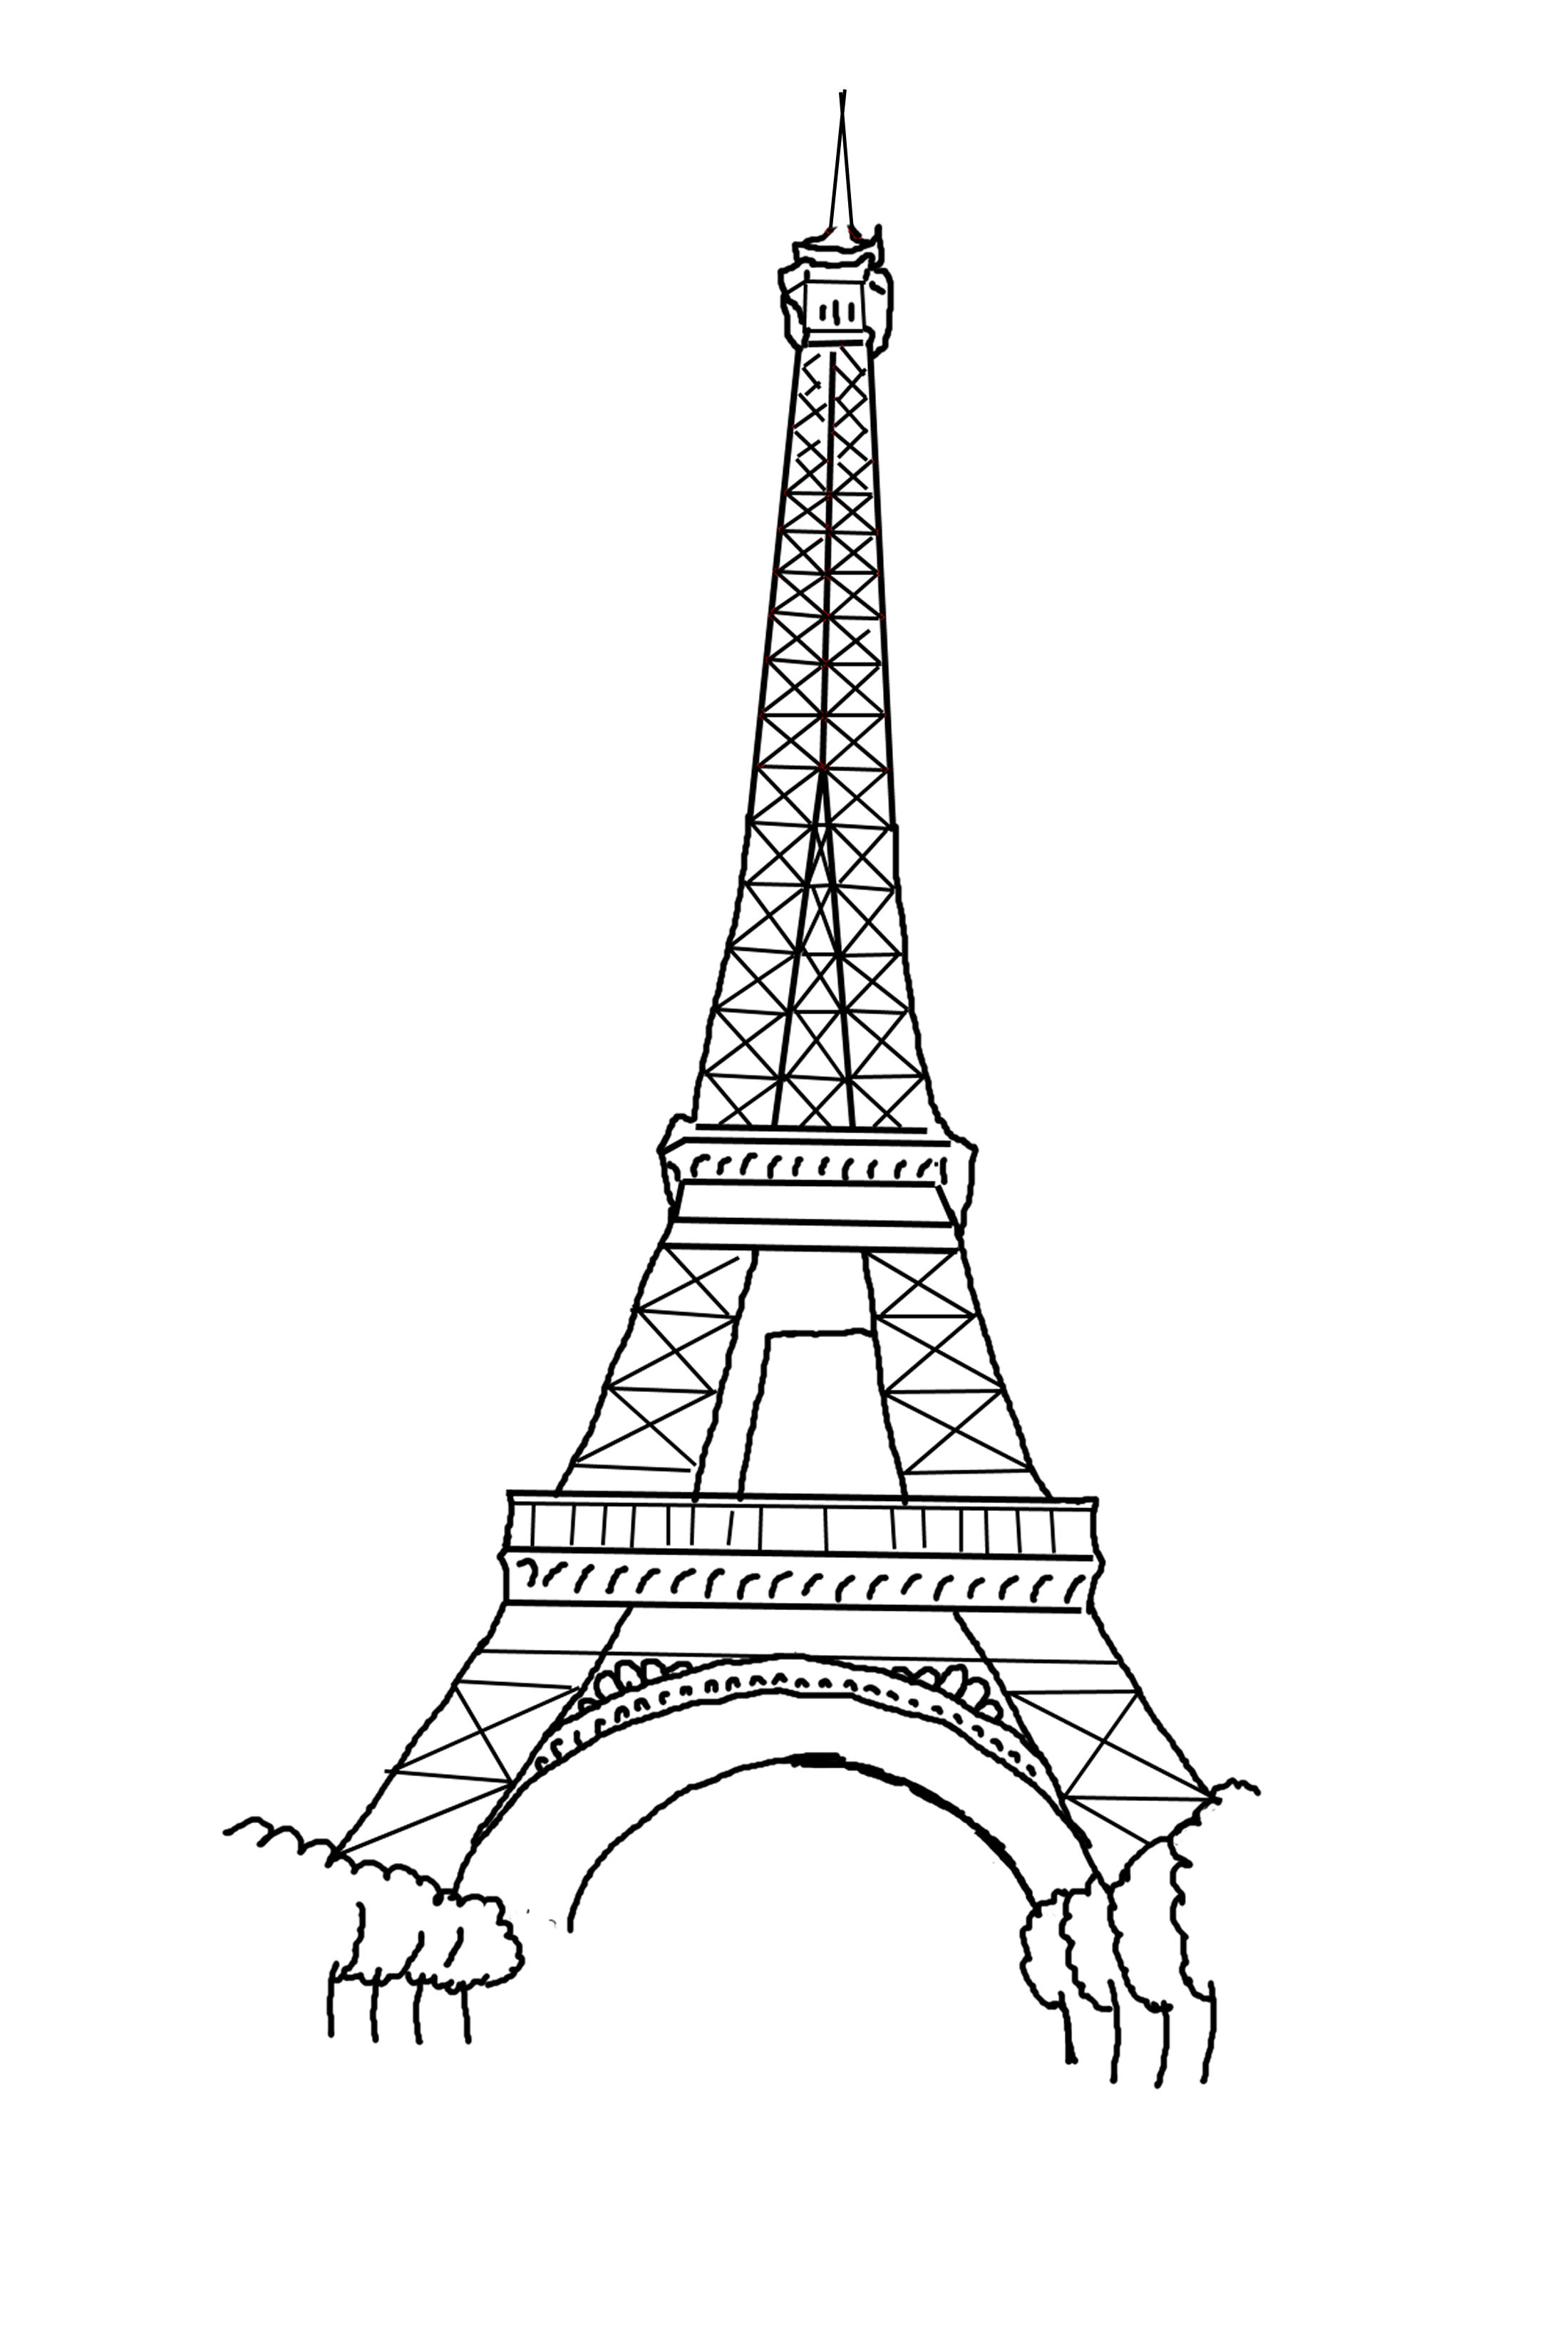 Free Printable Coloring Pages and Line Art - Part 13